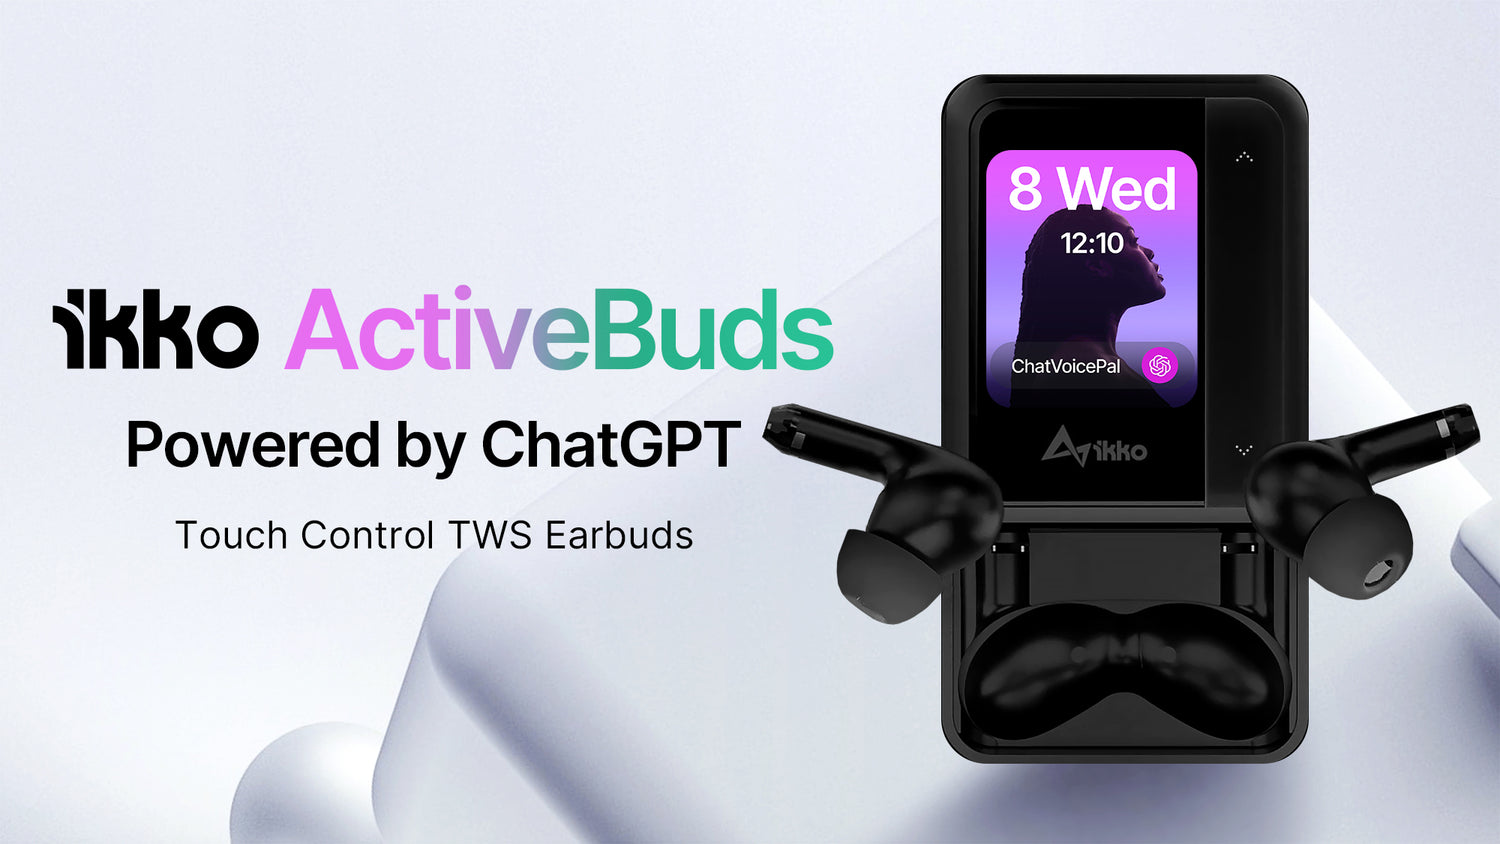 Introducing ActiveBuds: A Revolutionary AI-Powered Earwear Set to Transform Communication, Listening, and Translation